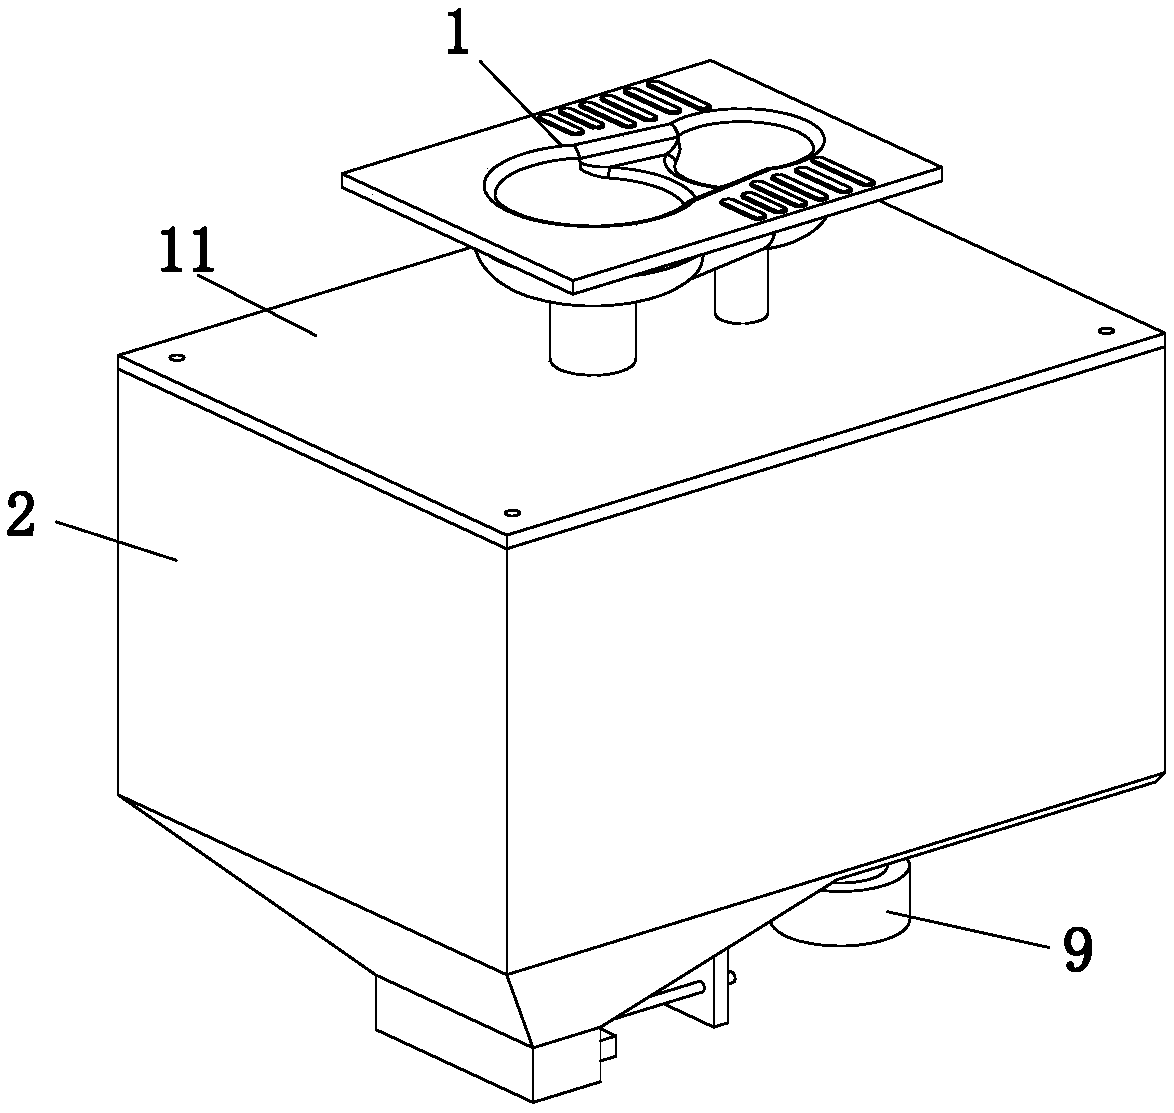 Urine and excrement separation deVice